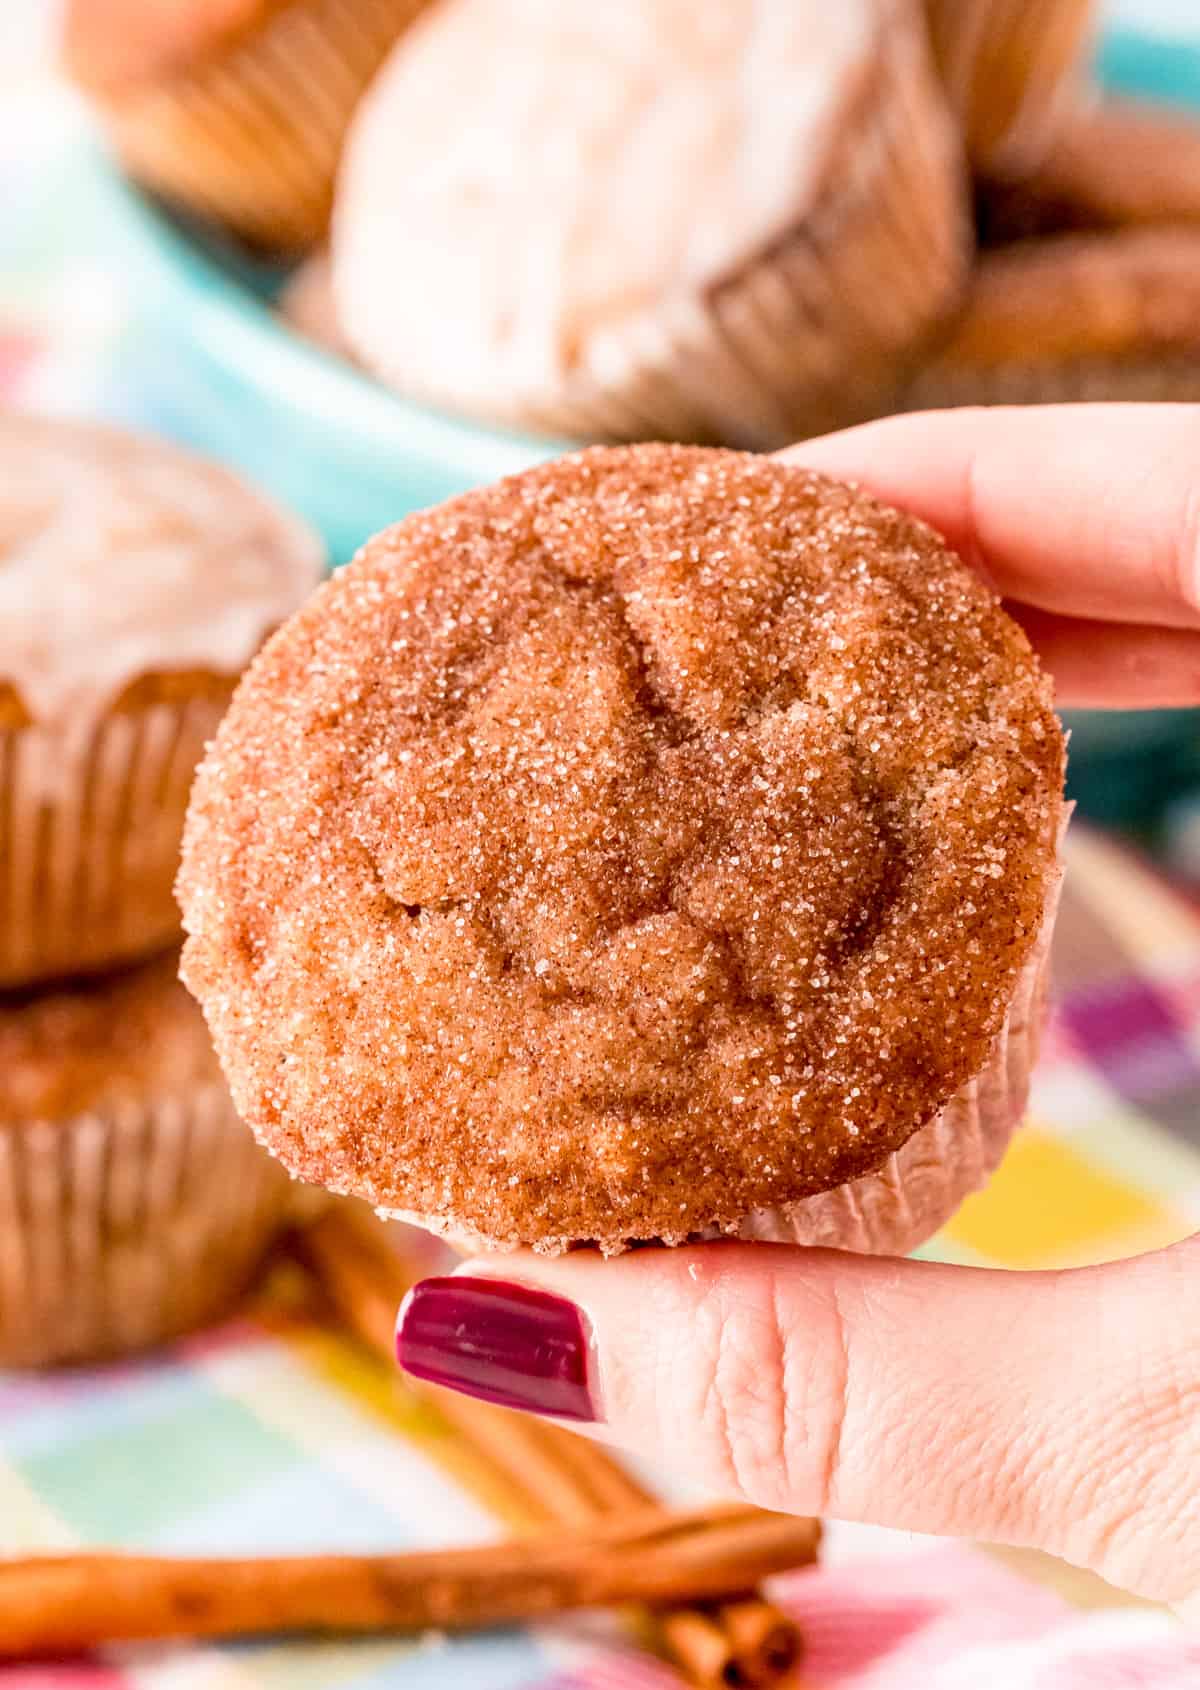 Hand holding up one muffin showing the cinnamon sugar topping.